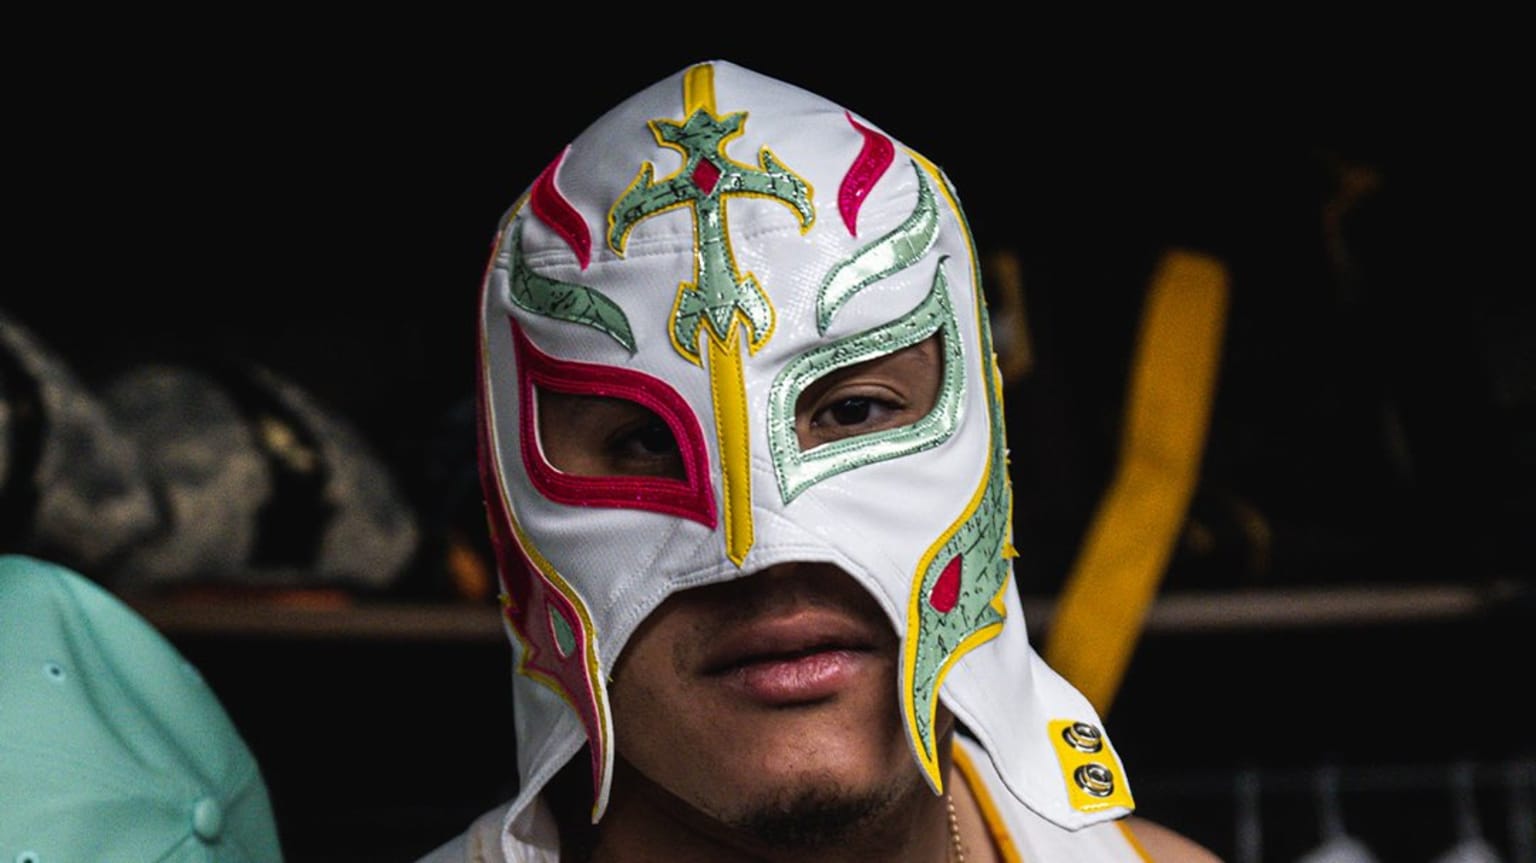 Manny Machado is pictured wearing a wrestling mask